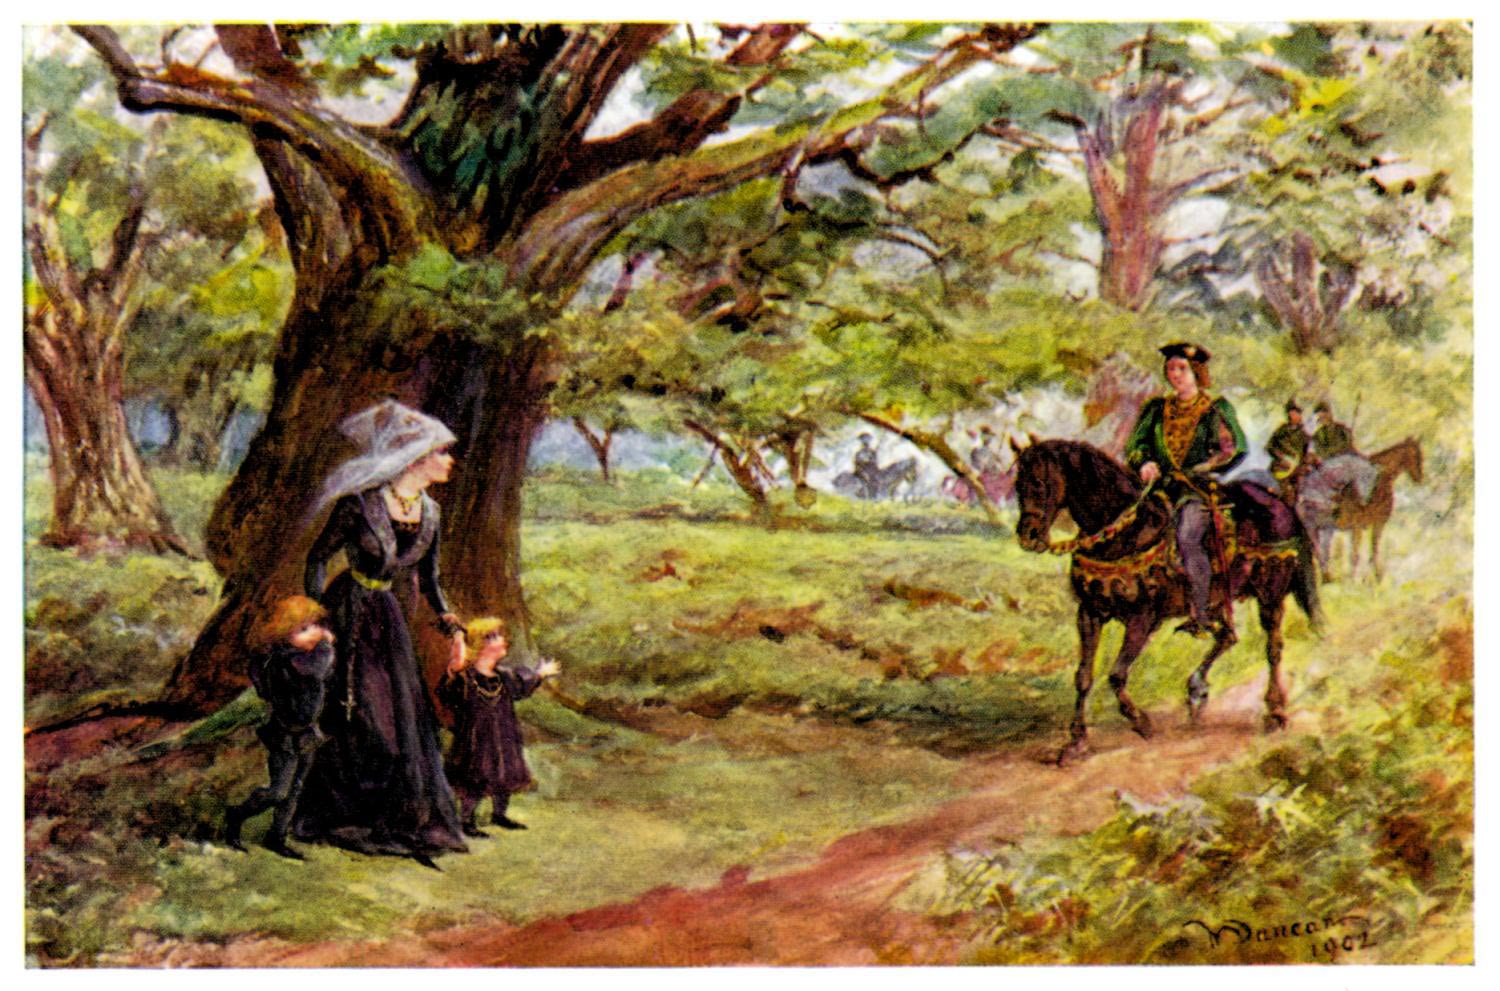 A non contemporary rendering of Elizabeth Woodville waiting for Edward under an oak tree. 